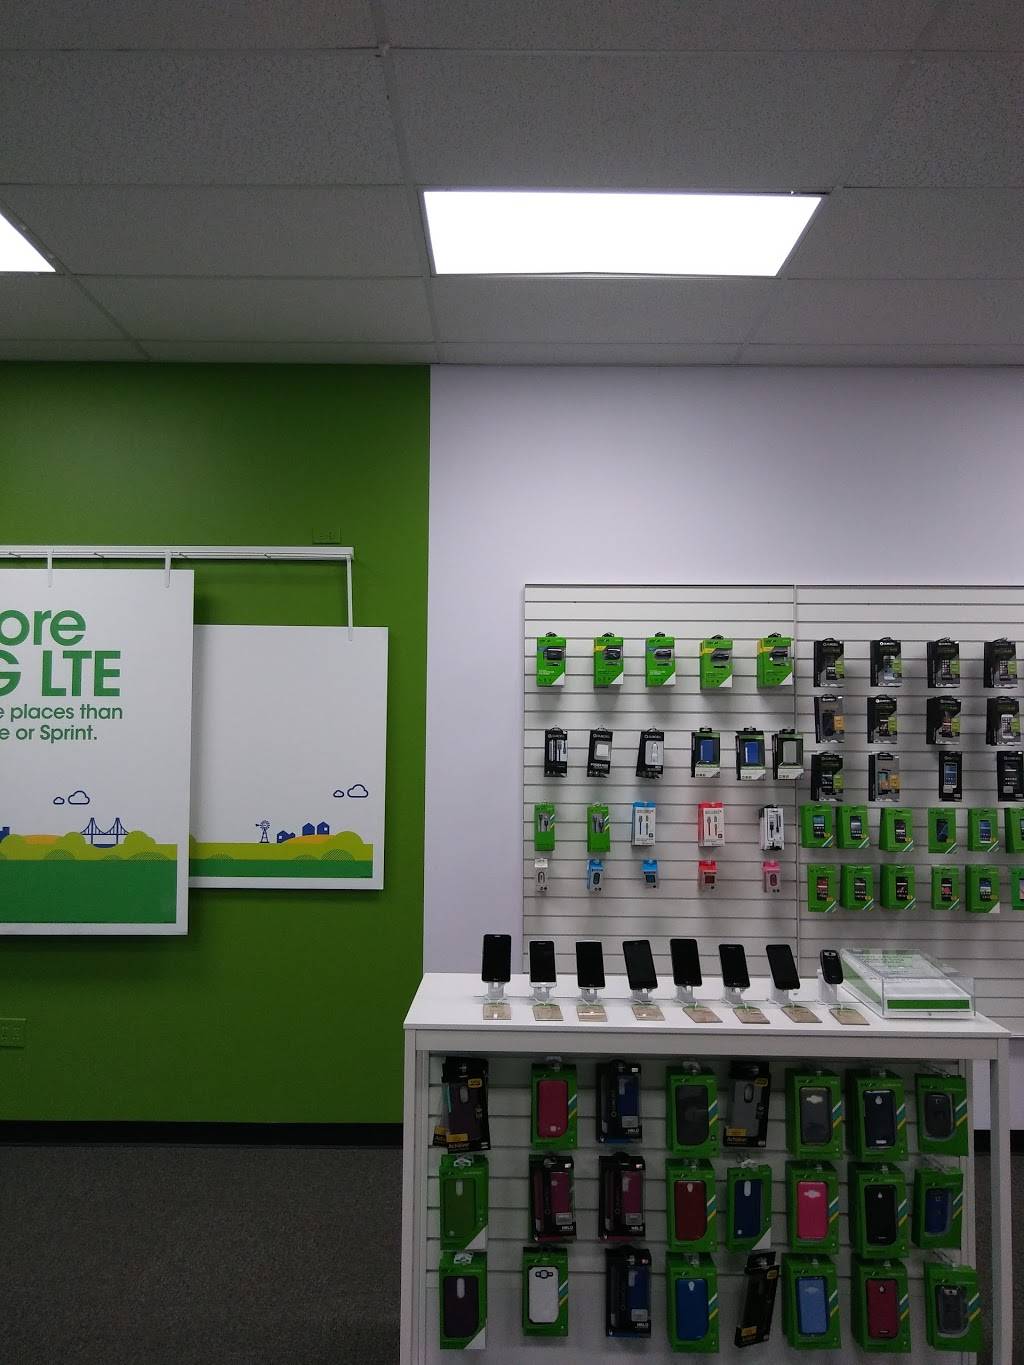 Cricket Wireless Authorized Retailer | 6411 Lima Rd, Fort Wayne, IN 46818, USA | Phone: (260) 755-3067